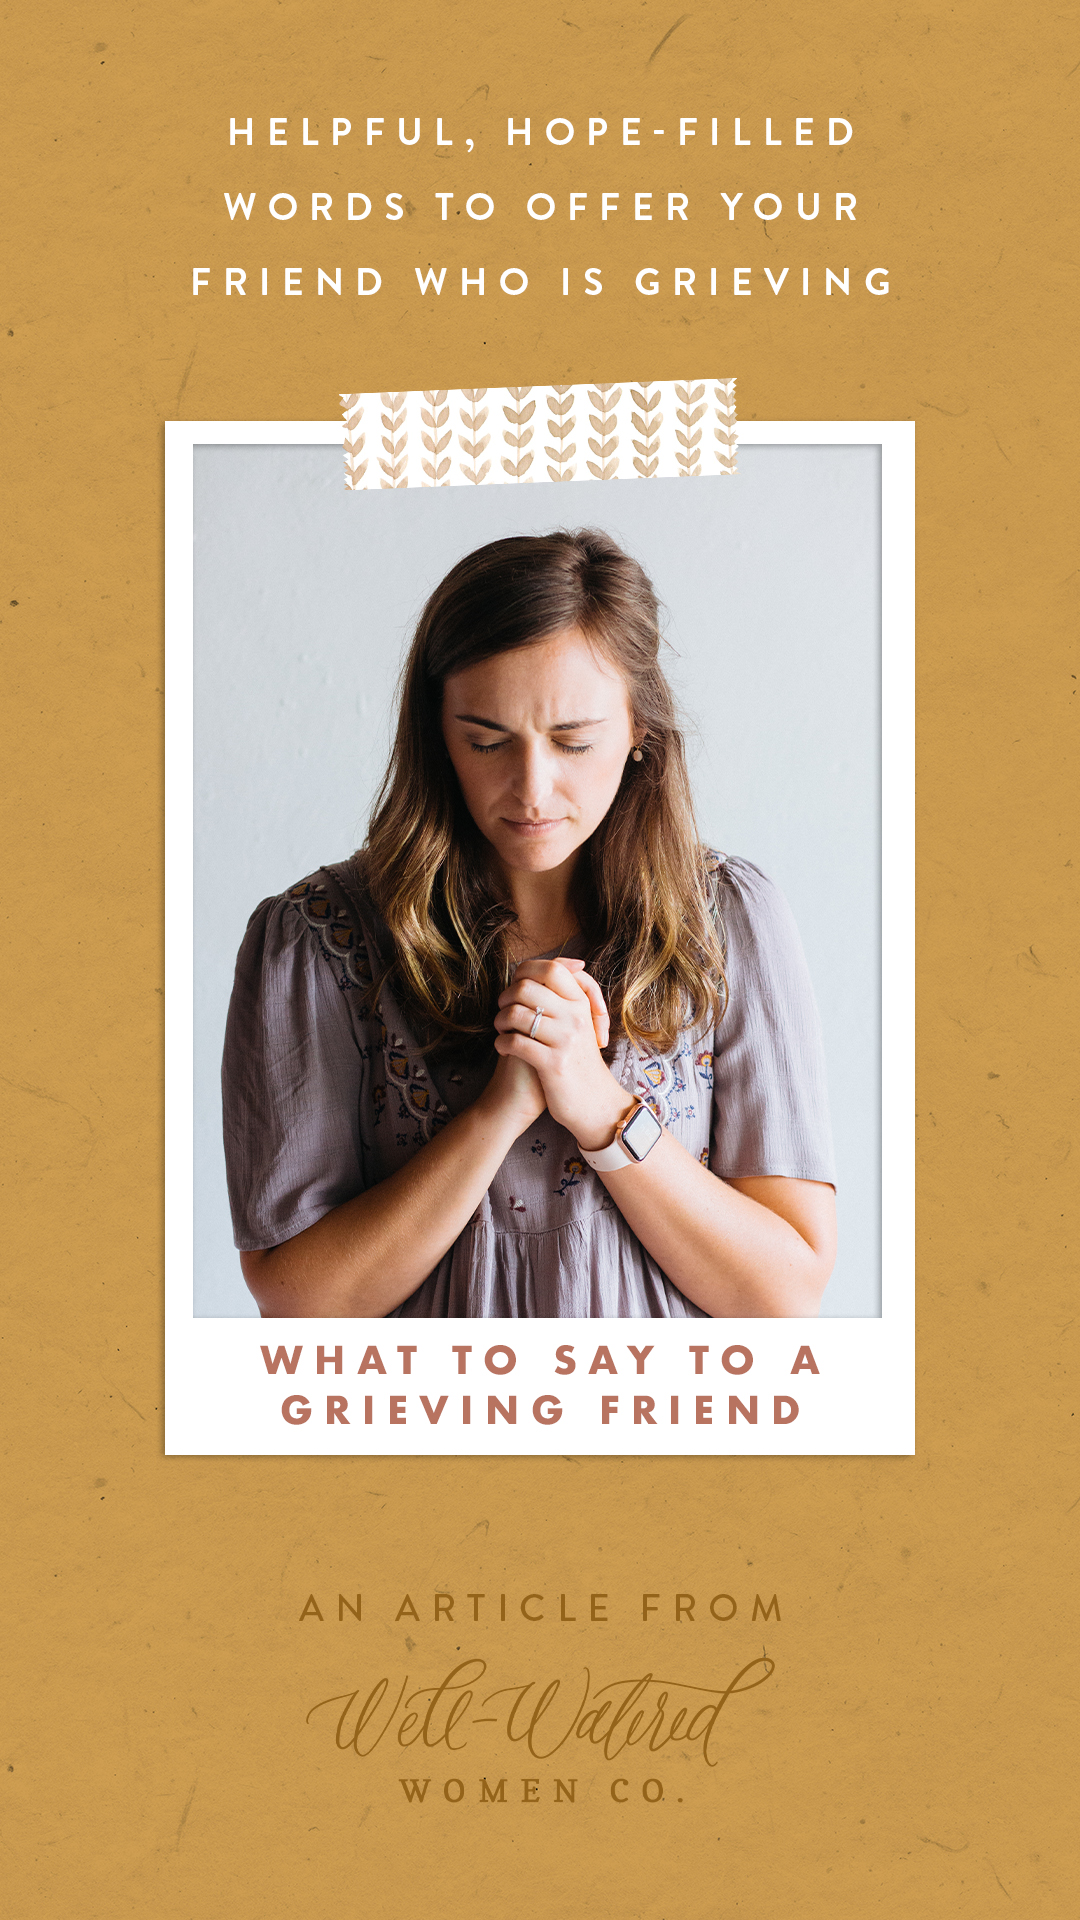 Words to Offer Your Grieving Friend-An Article by Well-Watered Women